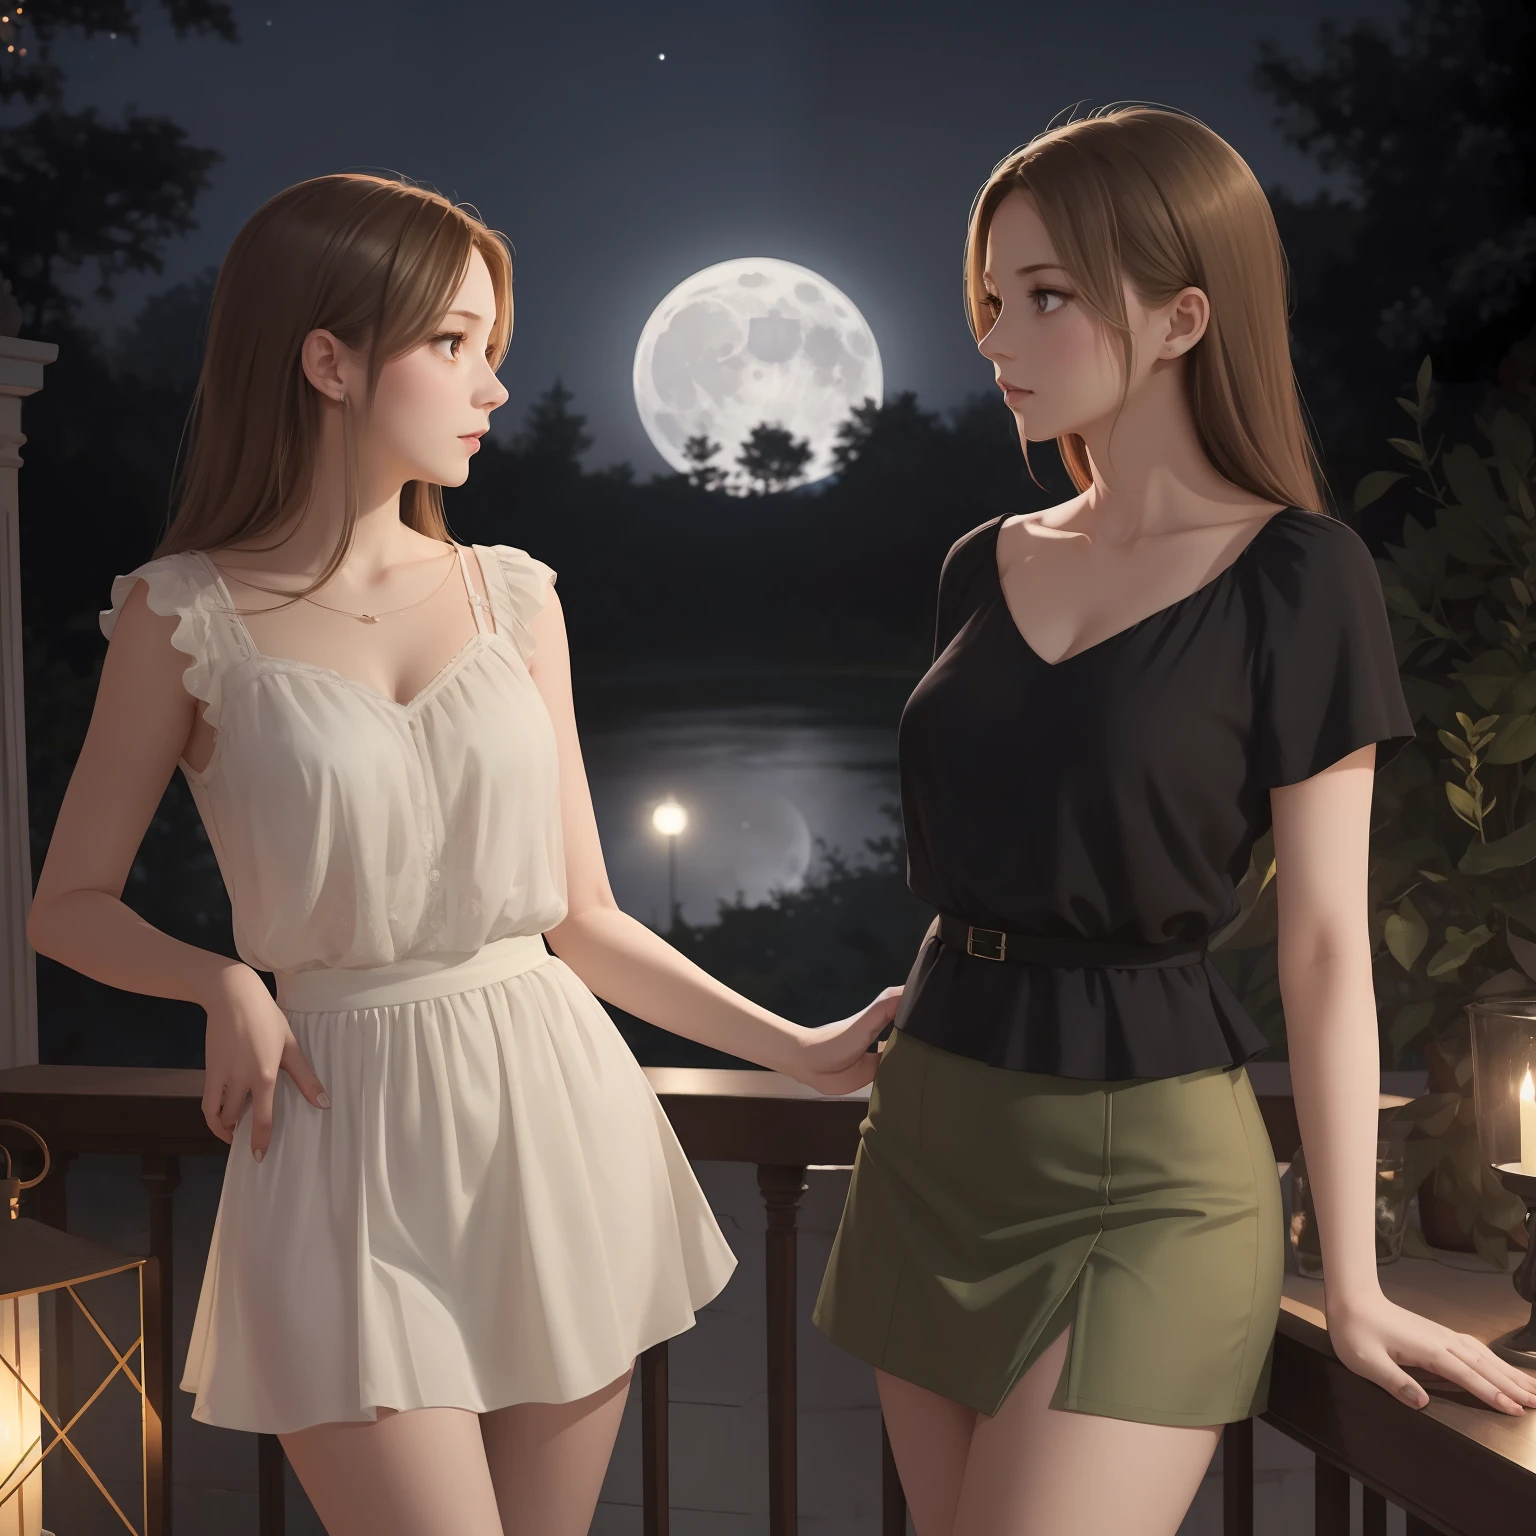 full figure sexy full figure  skinny mom 33 years old  woman whit 13 years old daughter at a  inside a palladian villa, wearing very short miniskirt, micro top, light brown hair and dark green eyes
. cinematic, moonlight, night,